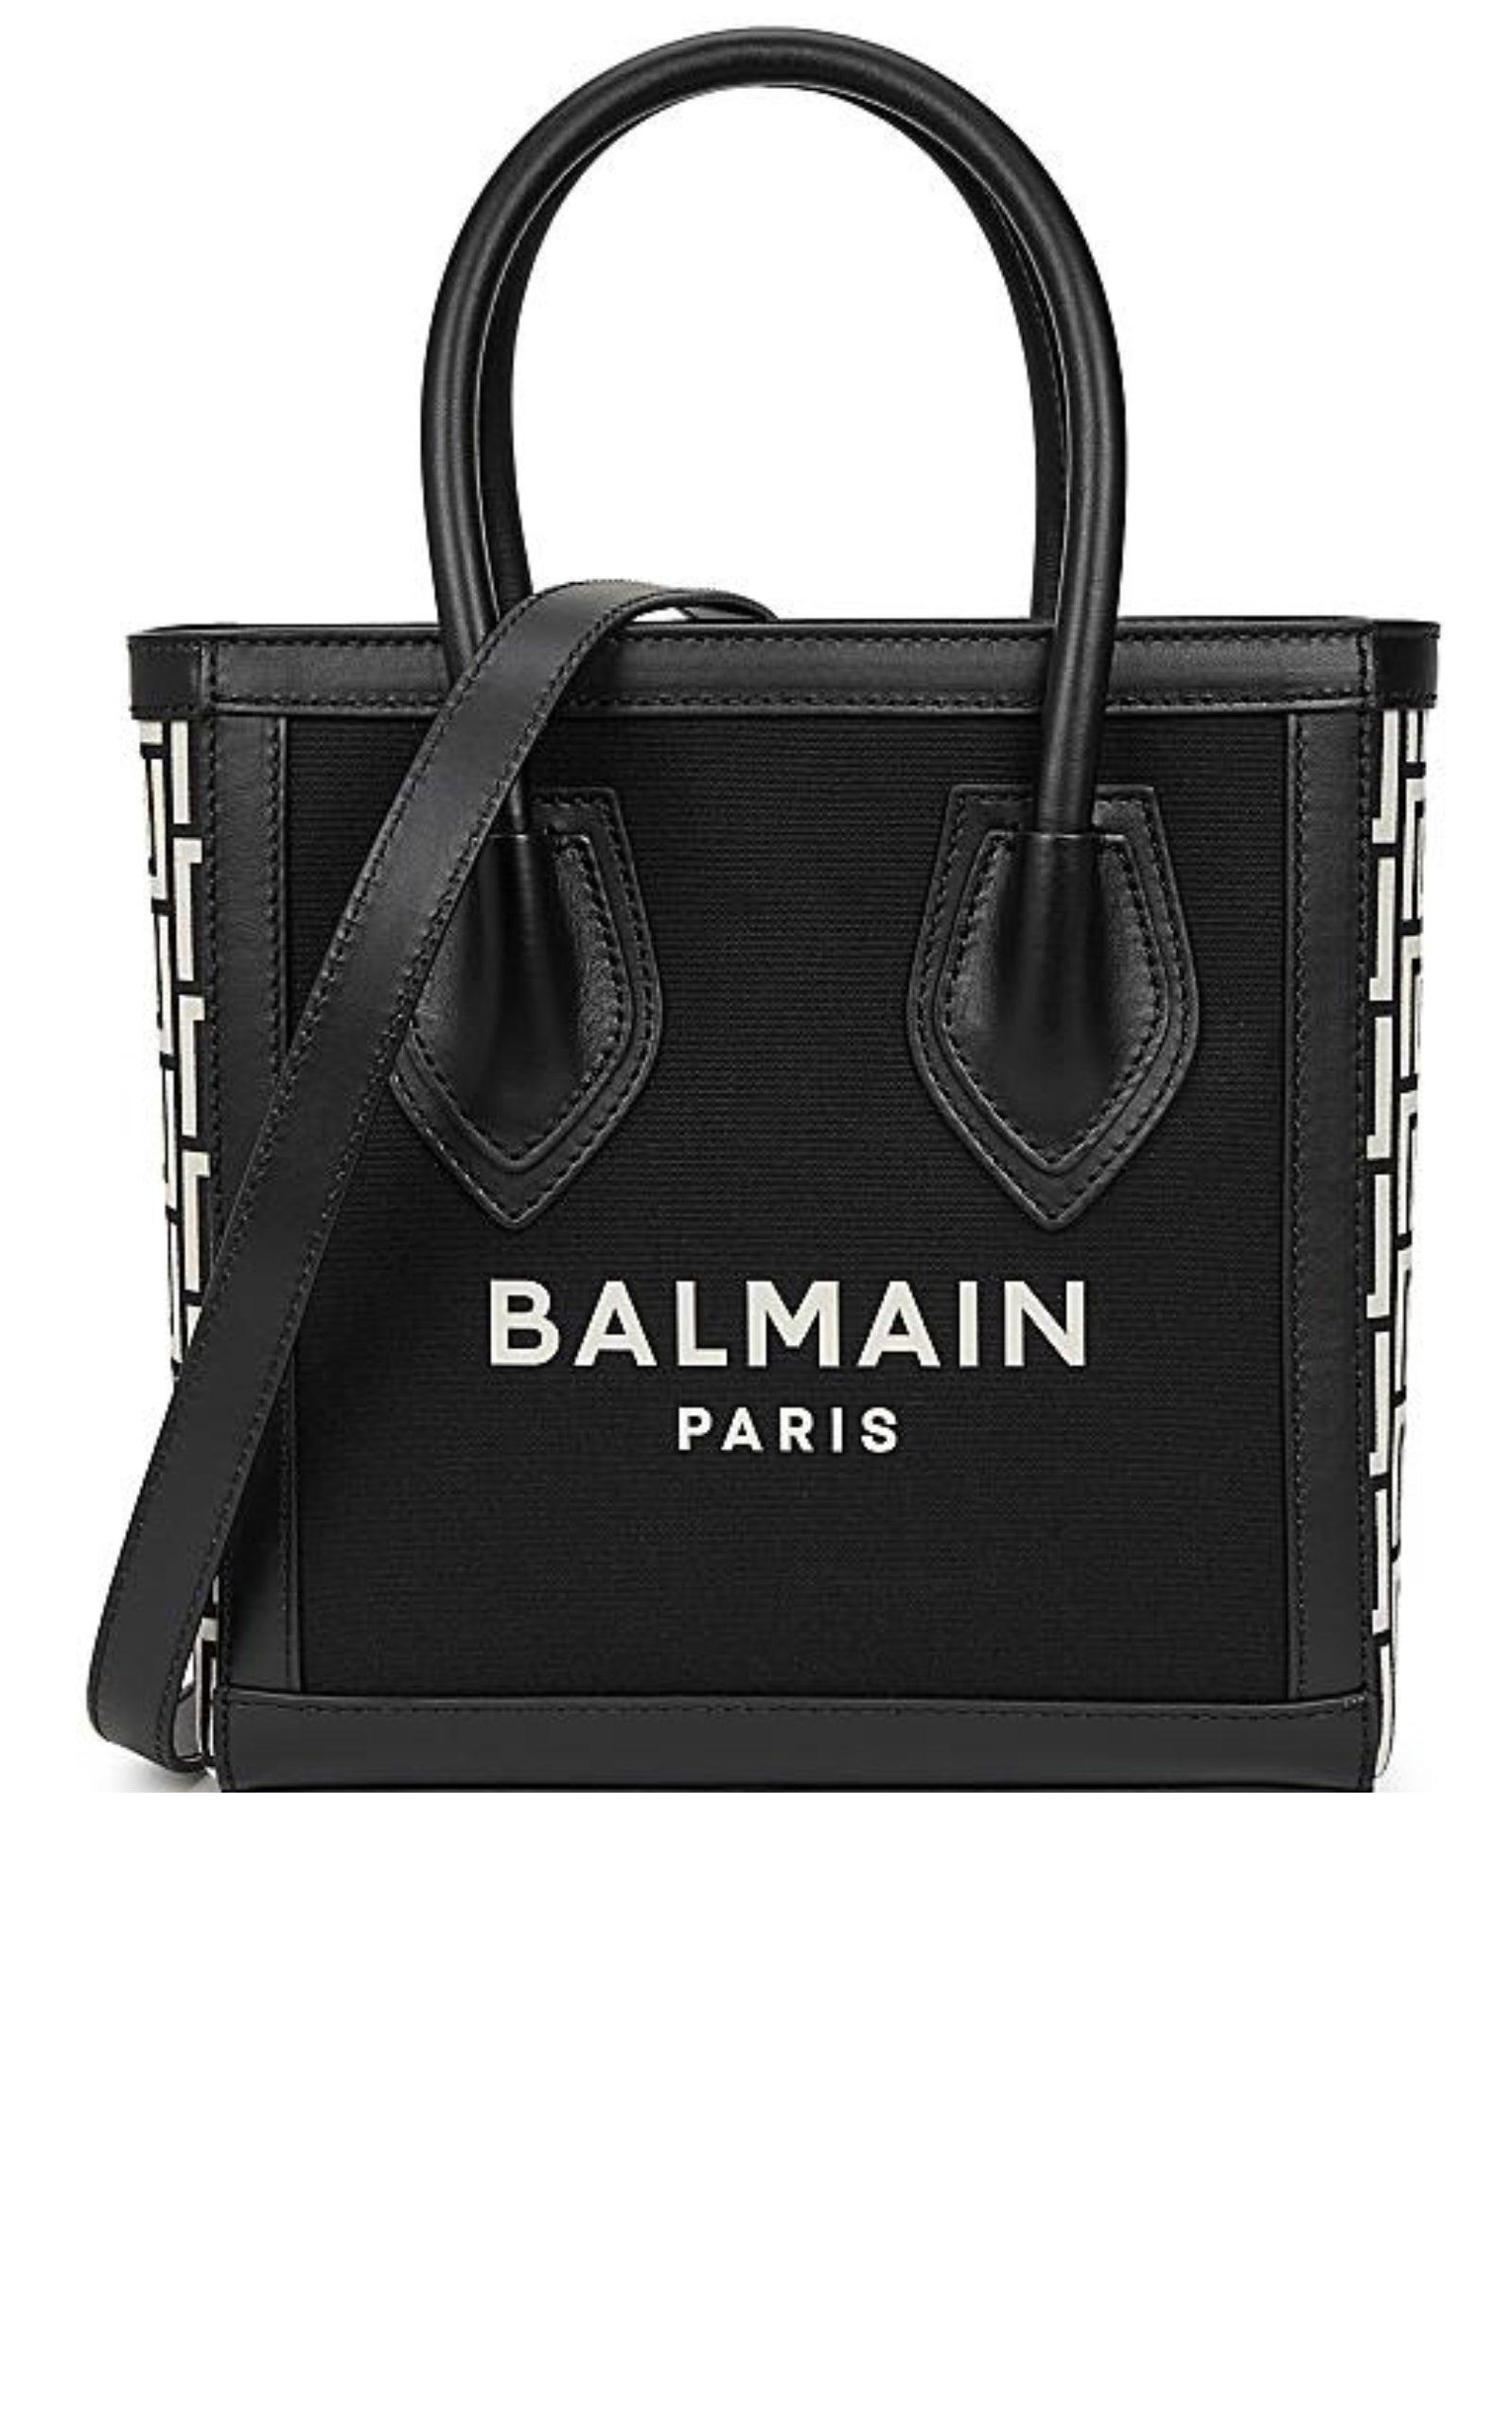 Balmain B-army 24 Panelled Canvas Tote in Black | Lyst